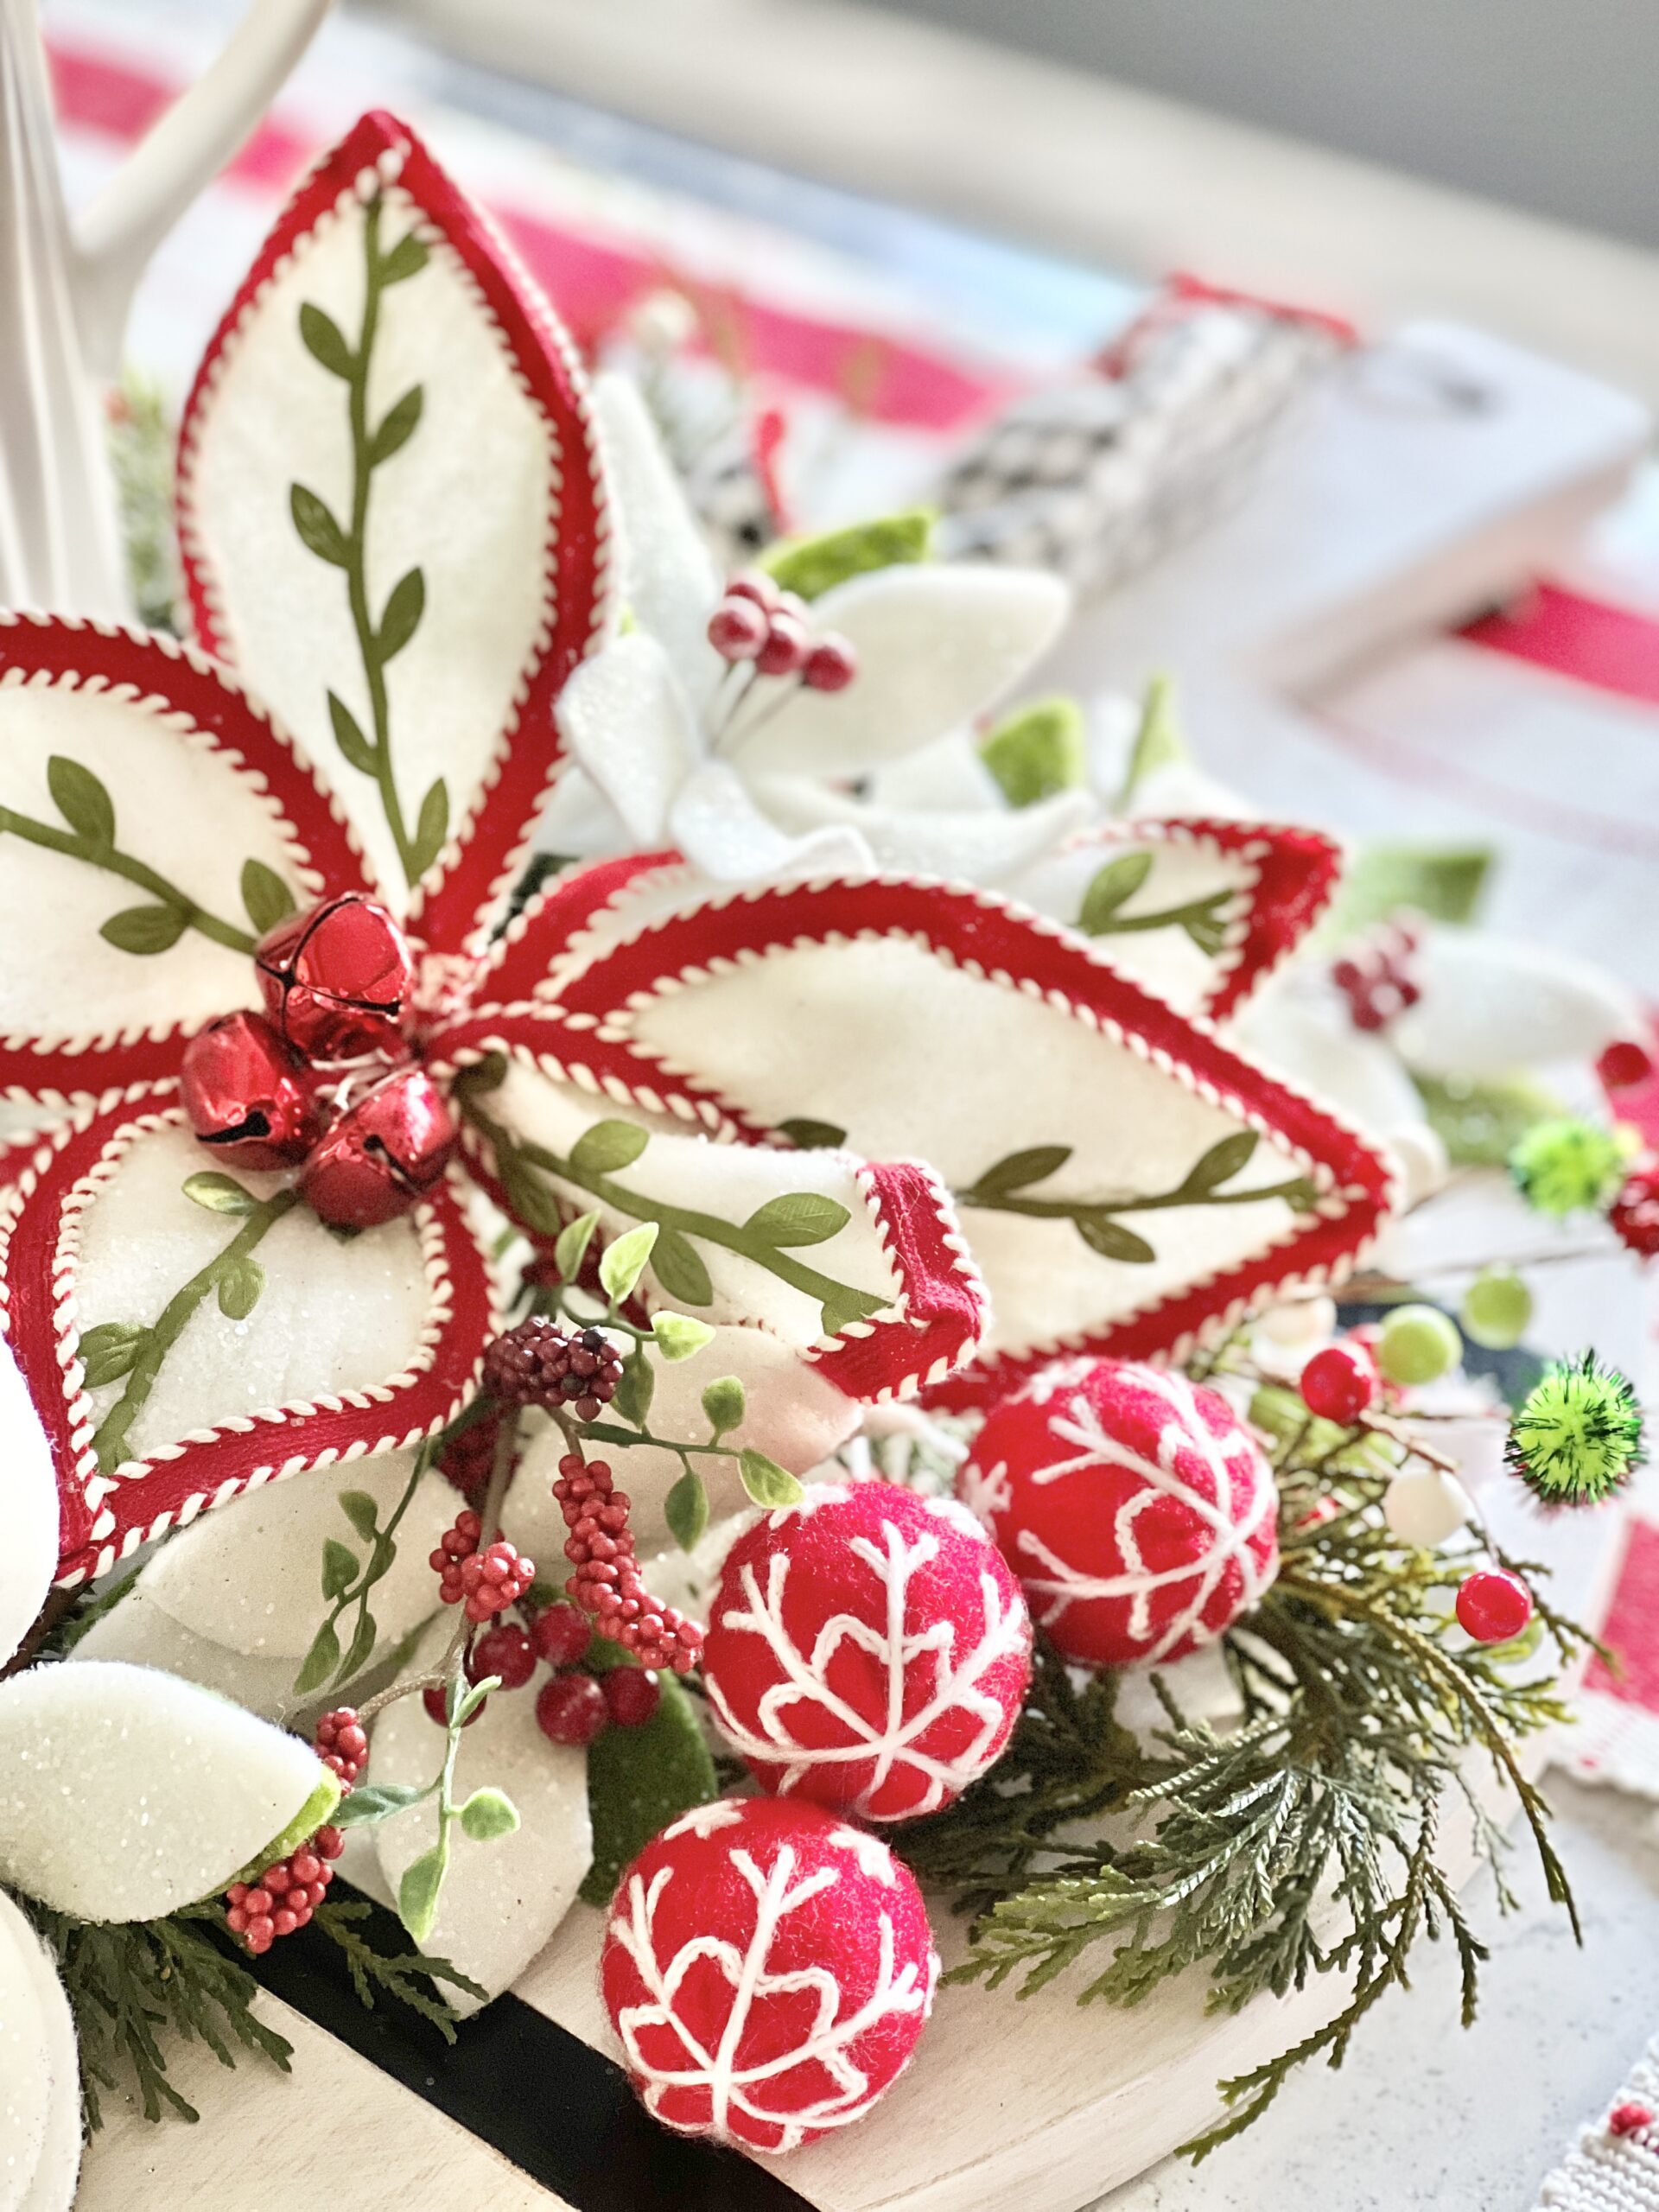 5 Easy Christmas Centerpiece Ideas for Your Holiday Table